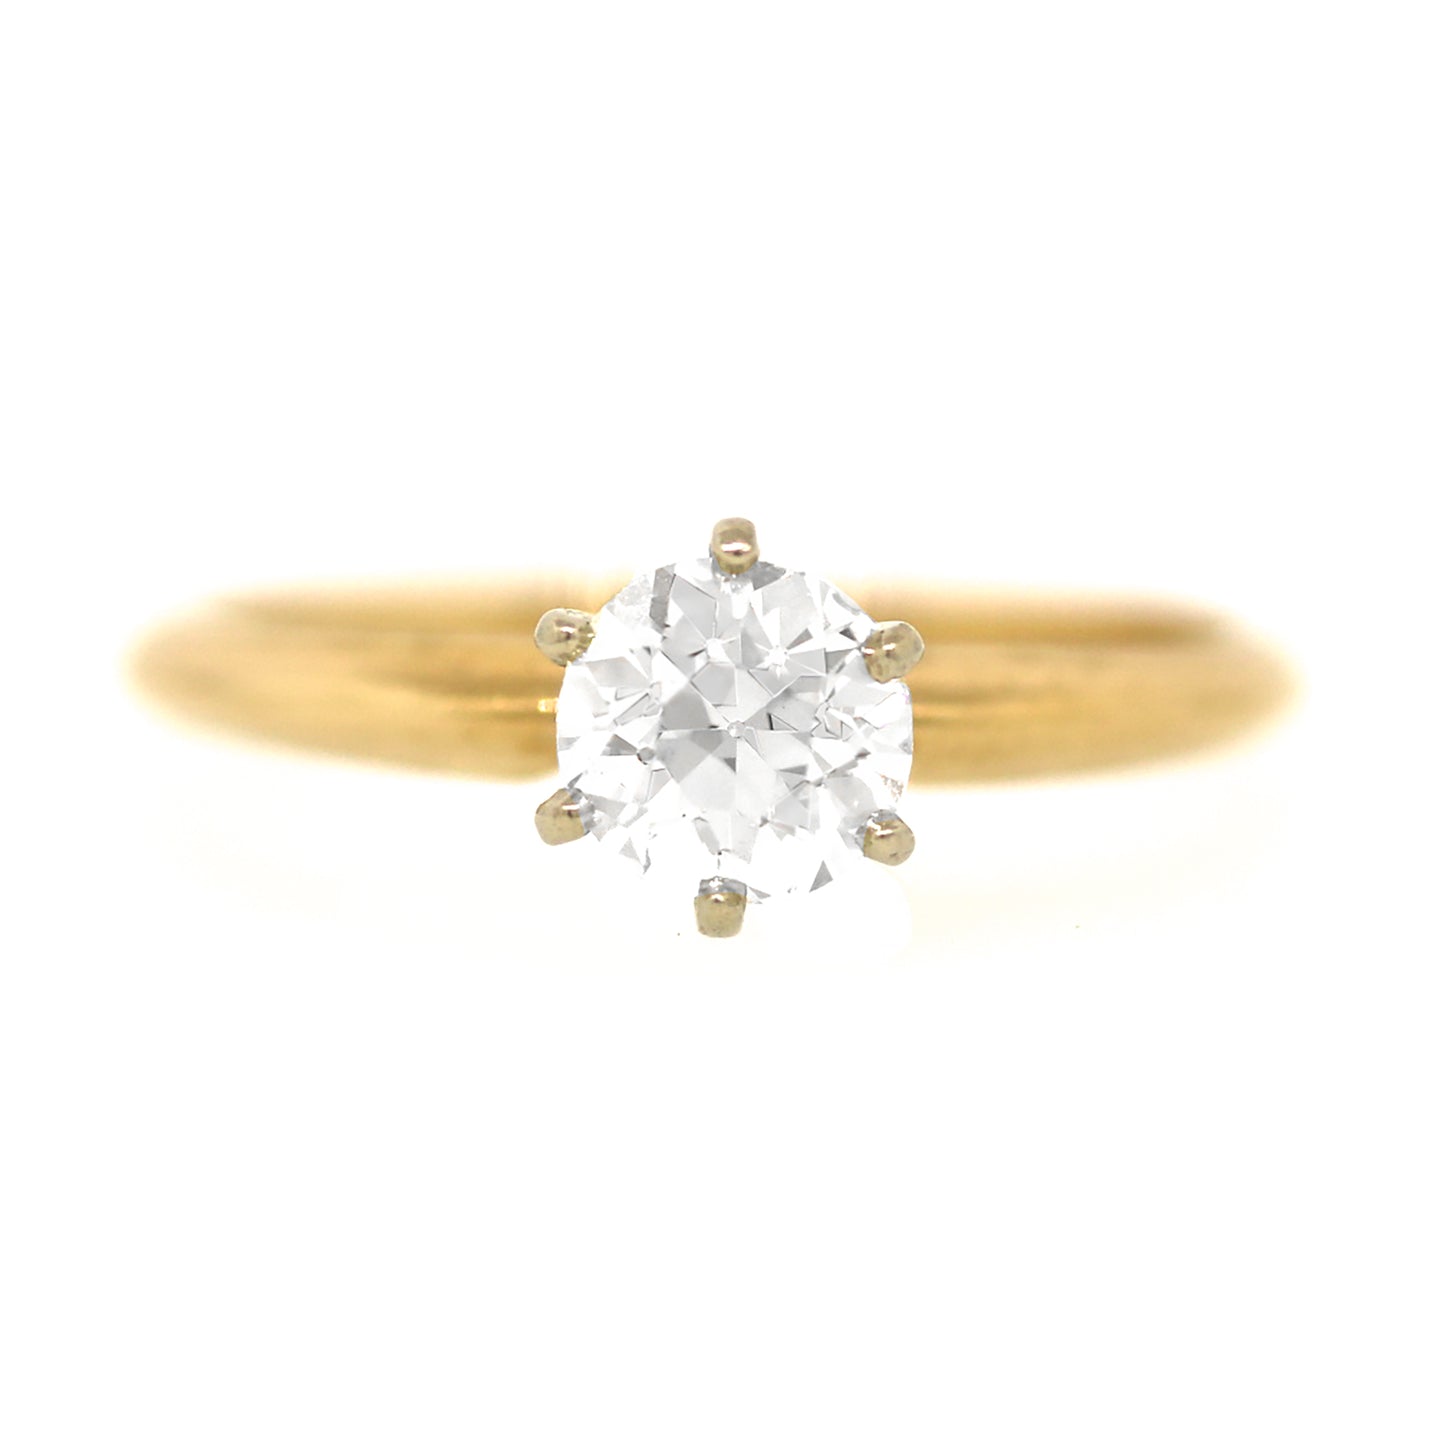 Pretty 14k Yellow Gold Diamond Solitaire Engagement Ring Size 5.25